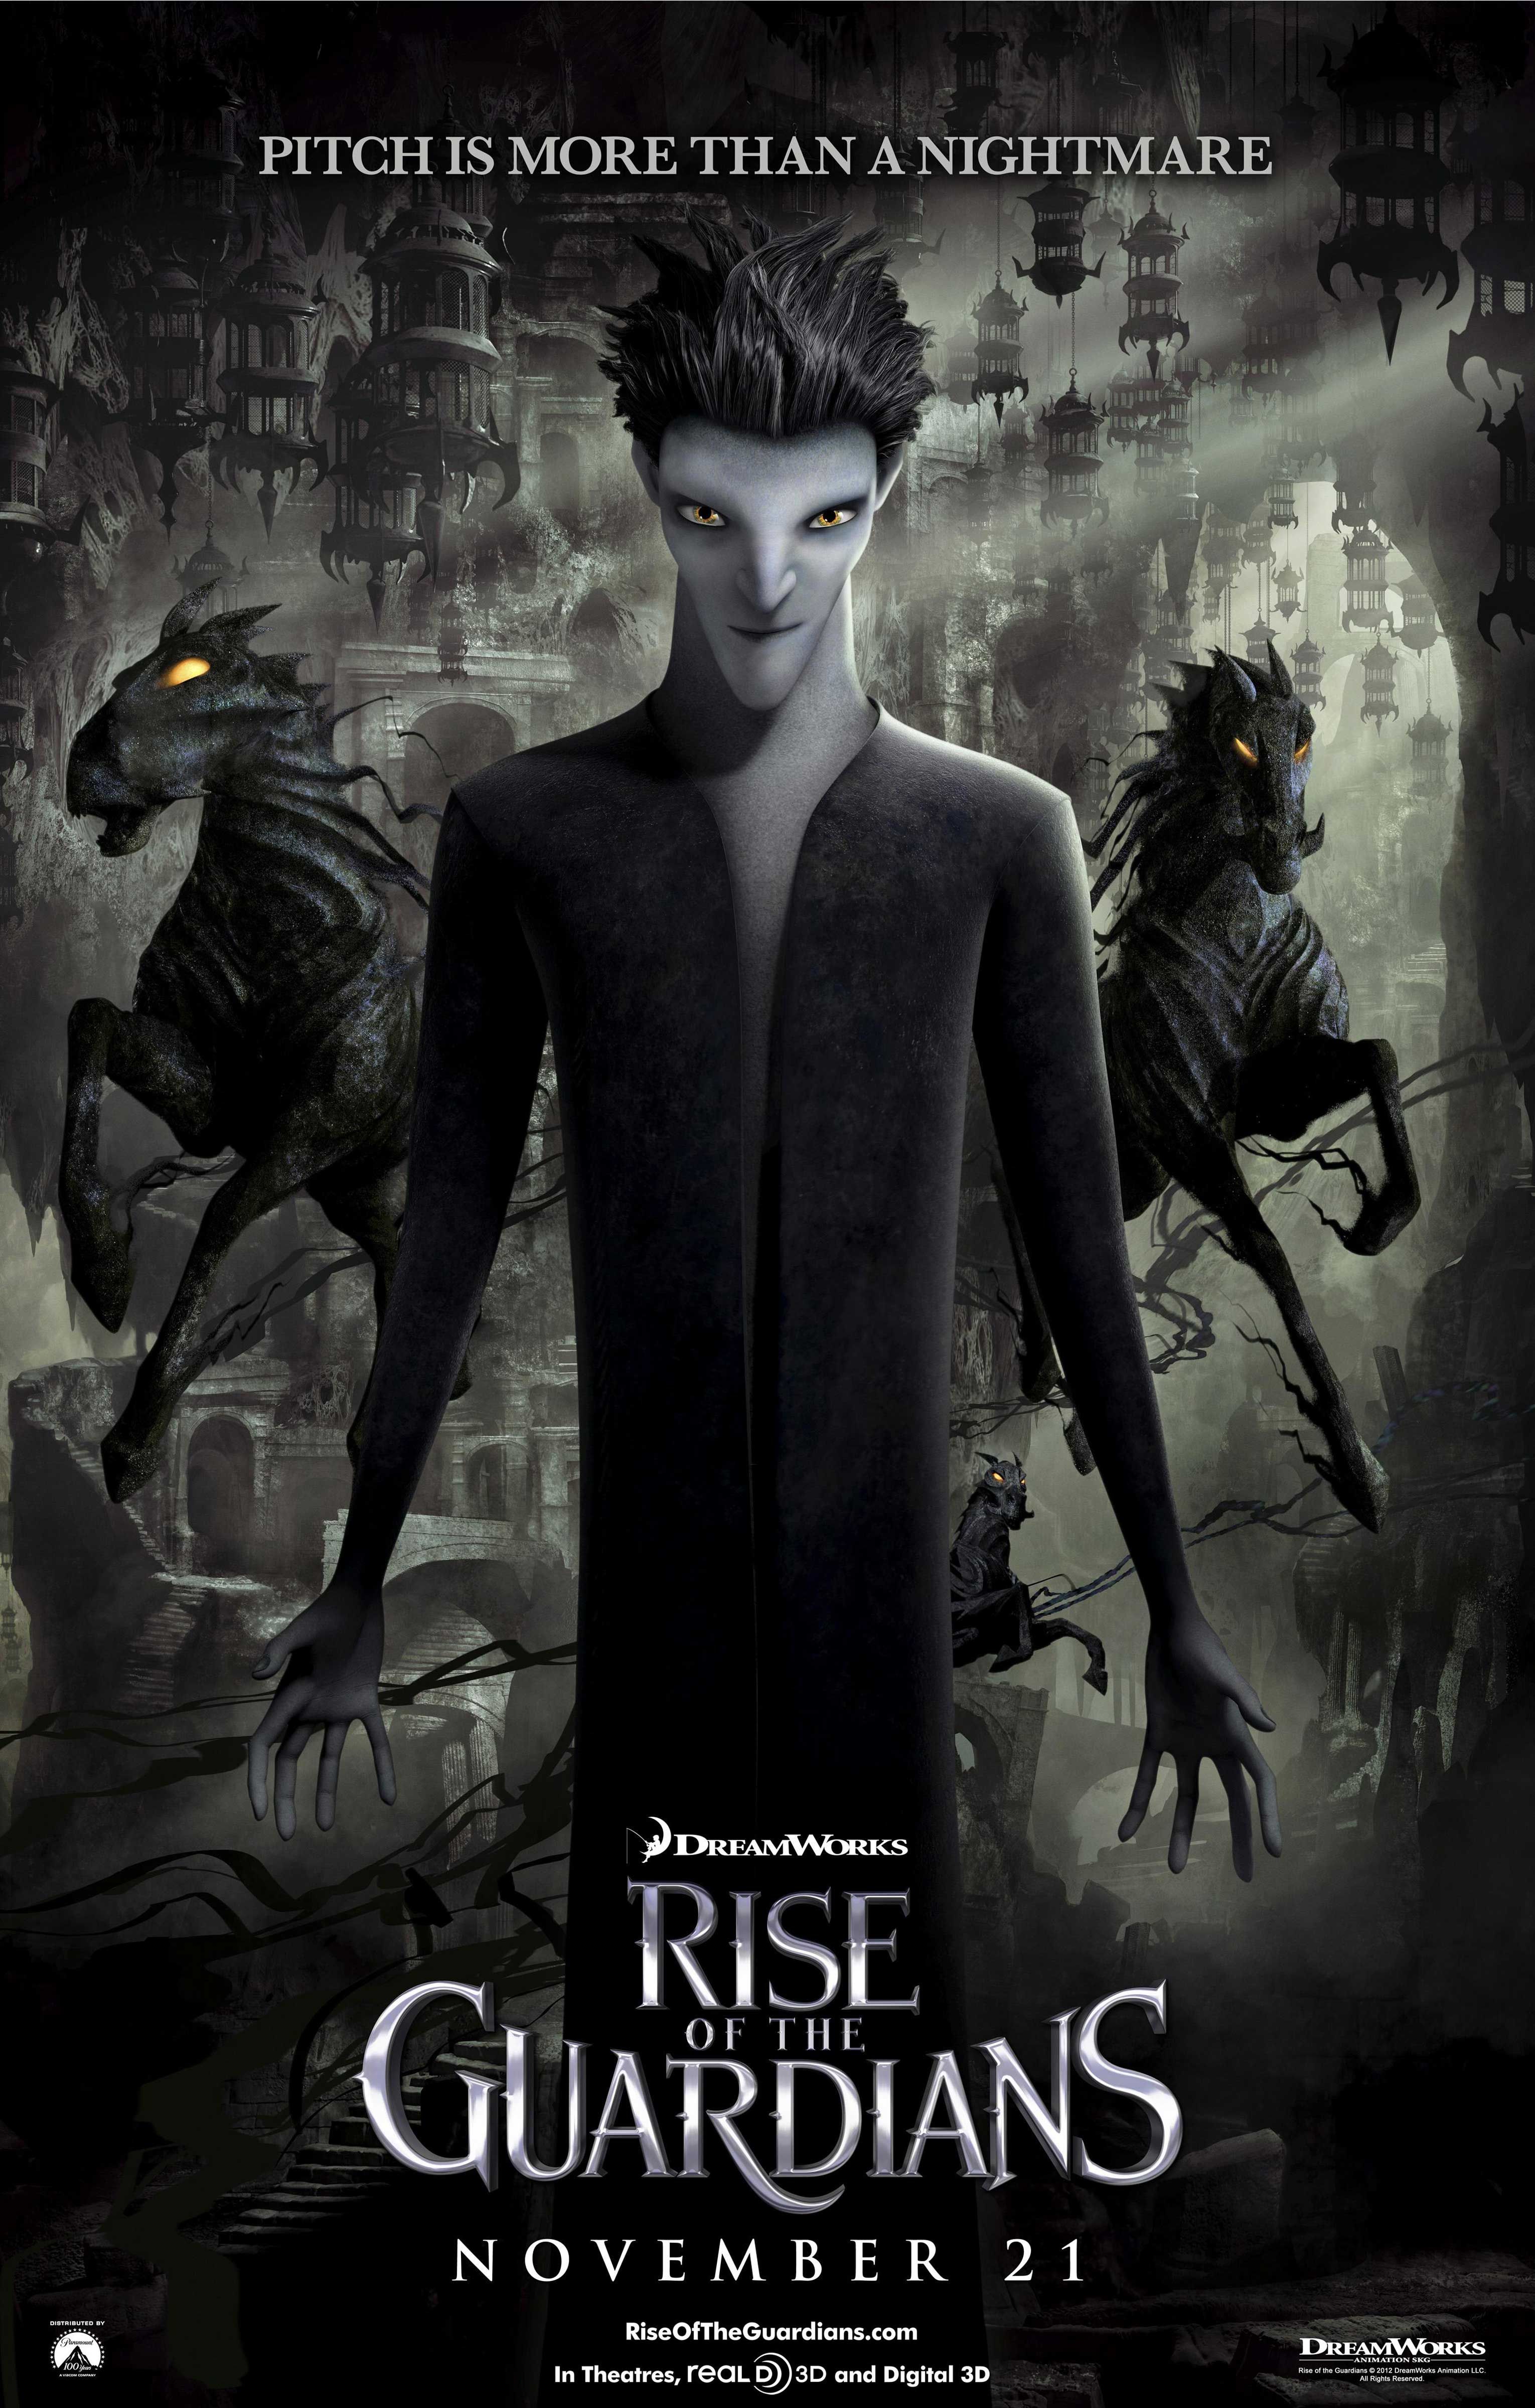 Watch Rise of the Guardians (Tamil Dubbed) Movie Online for Free Anytime